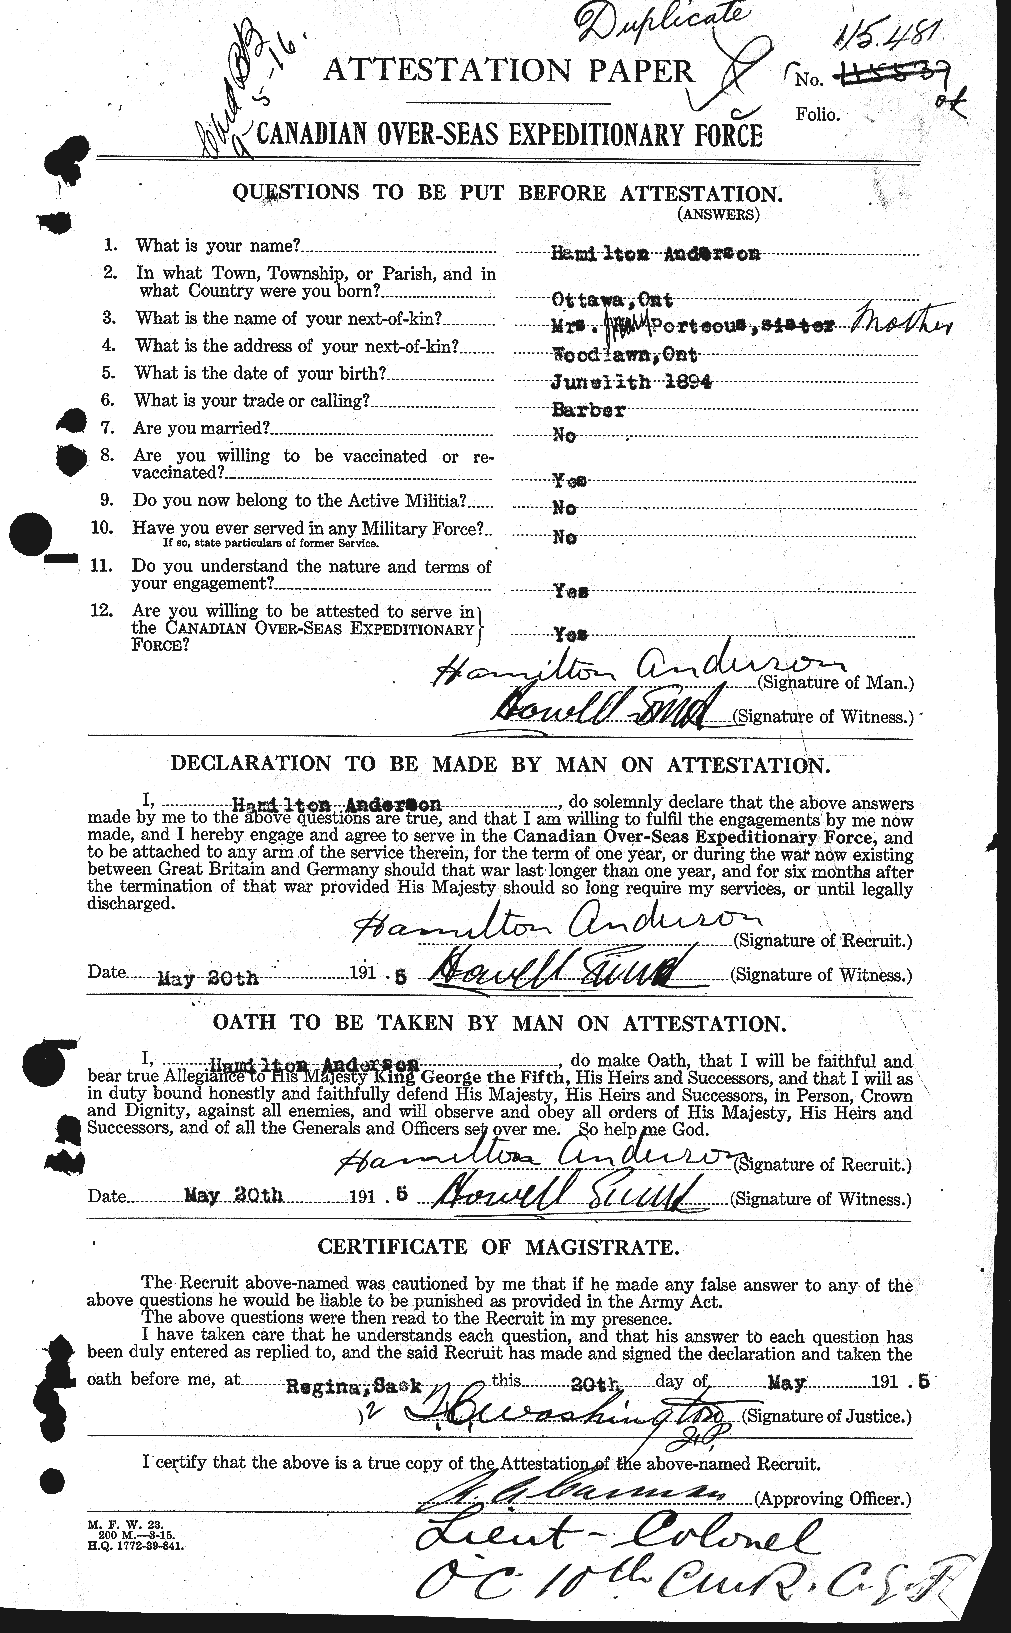 Personnel Records of the First World War - CEF 209637a